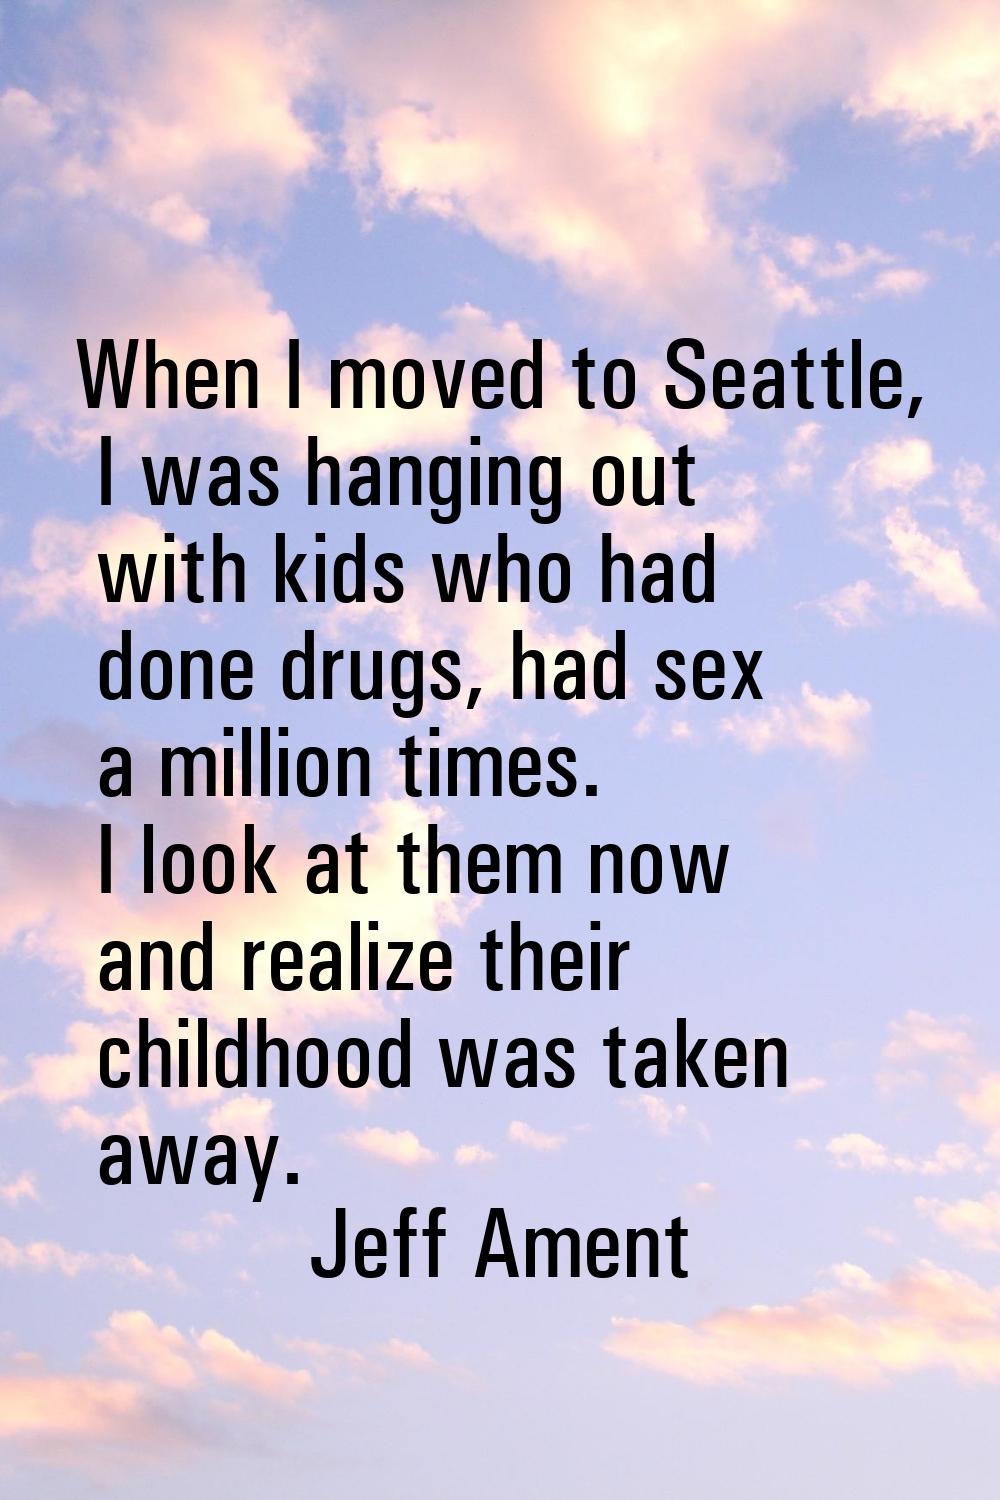 When I moved to Seattle, I was hanging out with kids who had done drugs, had sex a million times. I